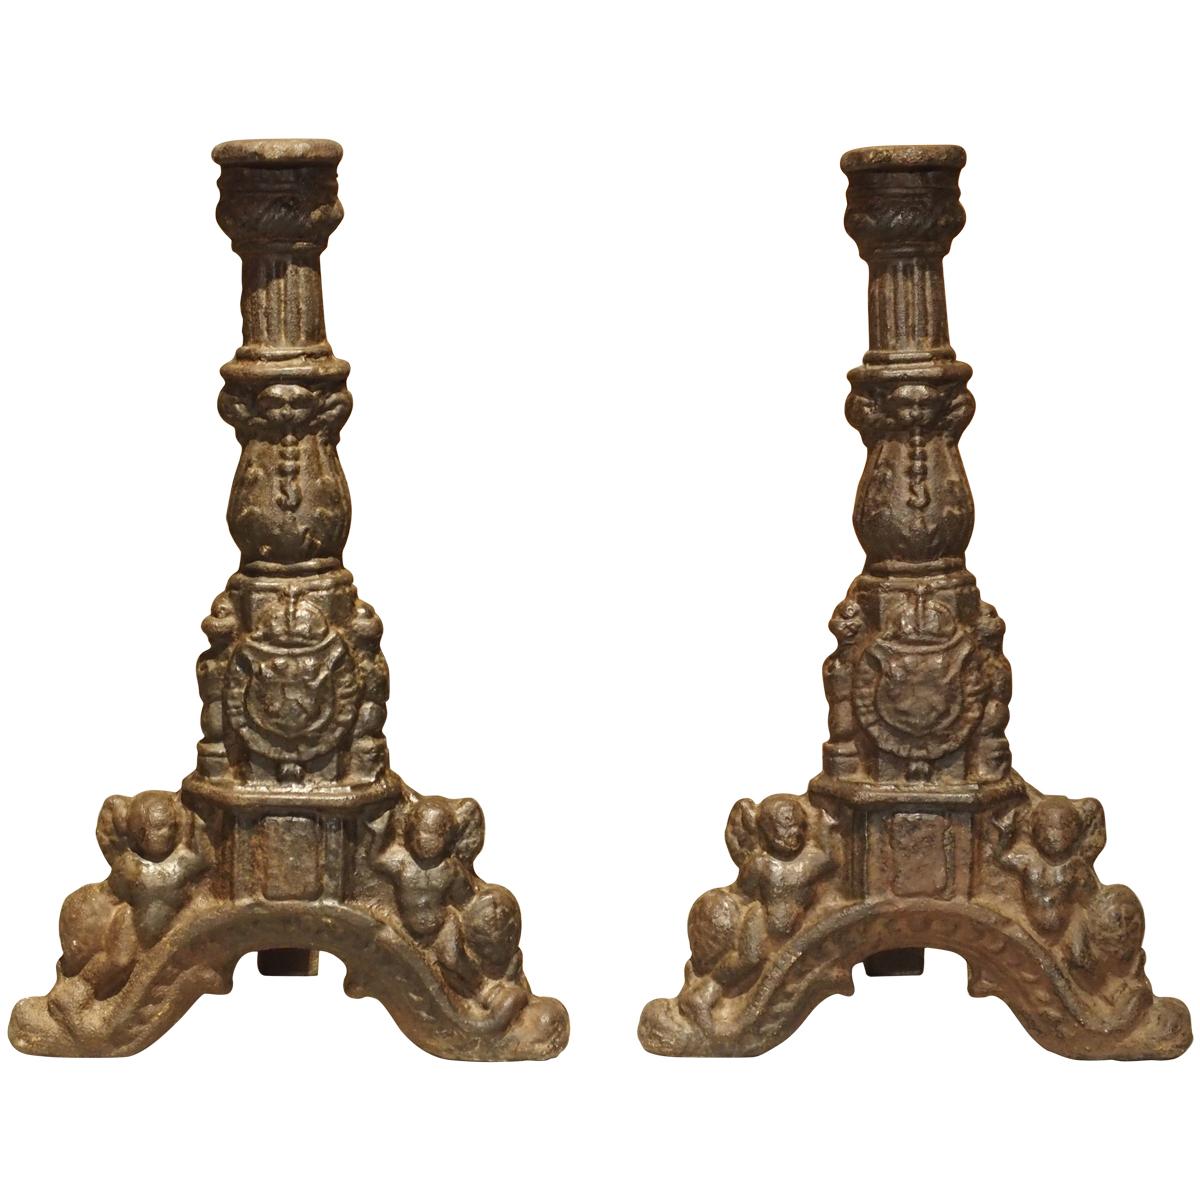 Pair of 16th Century Chateau Fireplace Andirons from France